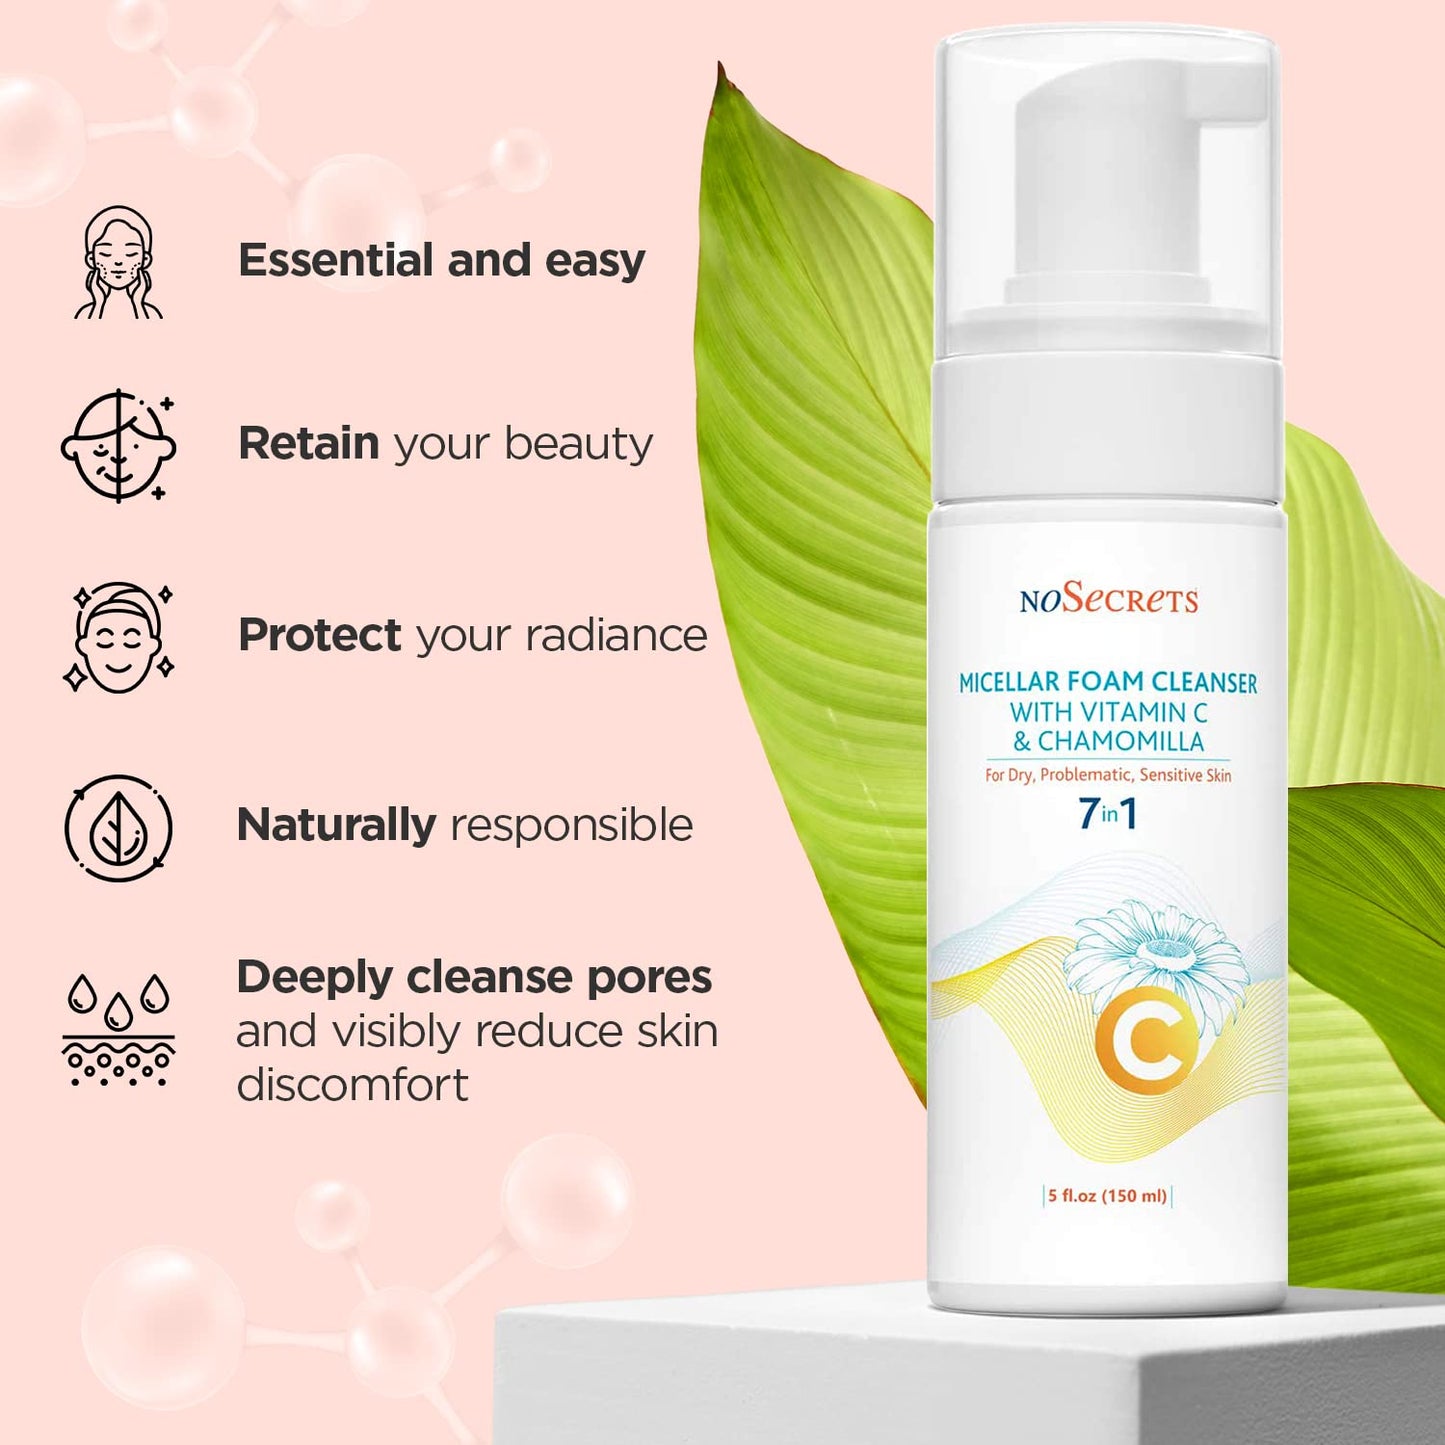 New Face Foam Daily Cleanser with Vitamin C, Aloe Vera and Hyaluronic Acid | Gentle Micellar Water Foam Facial Cleanser for All Skin Types | 5 fl oz